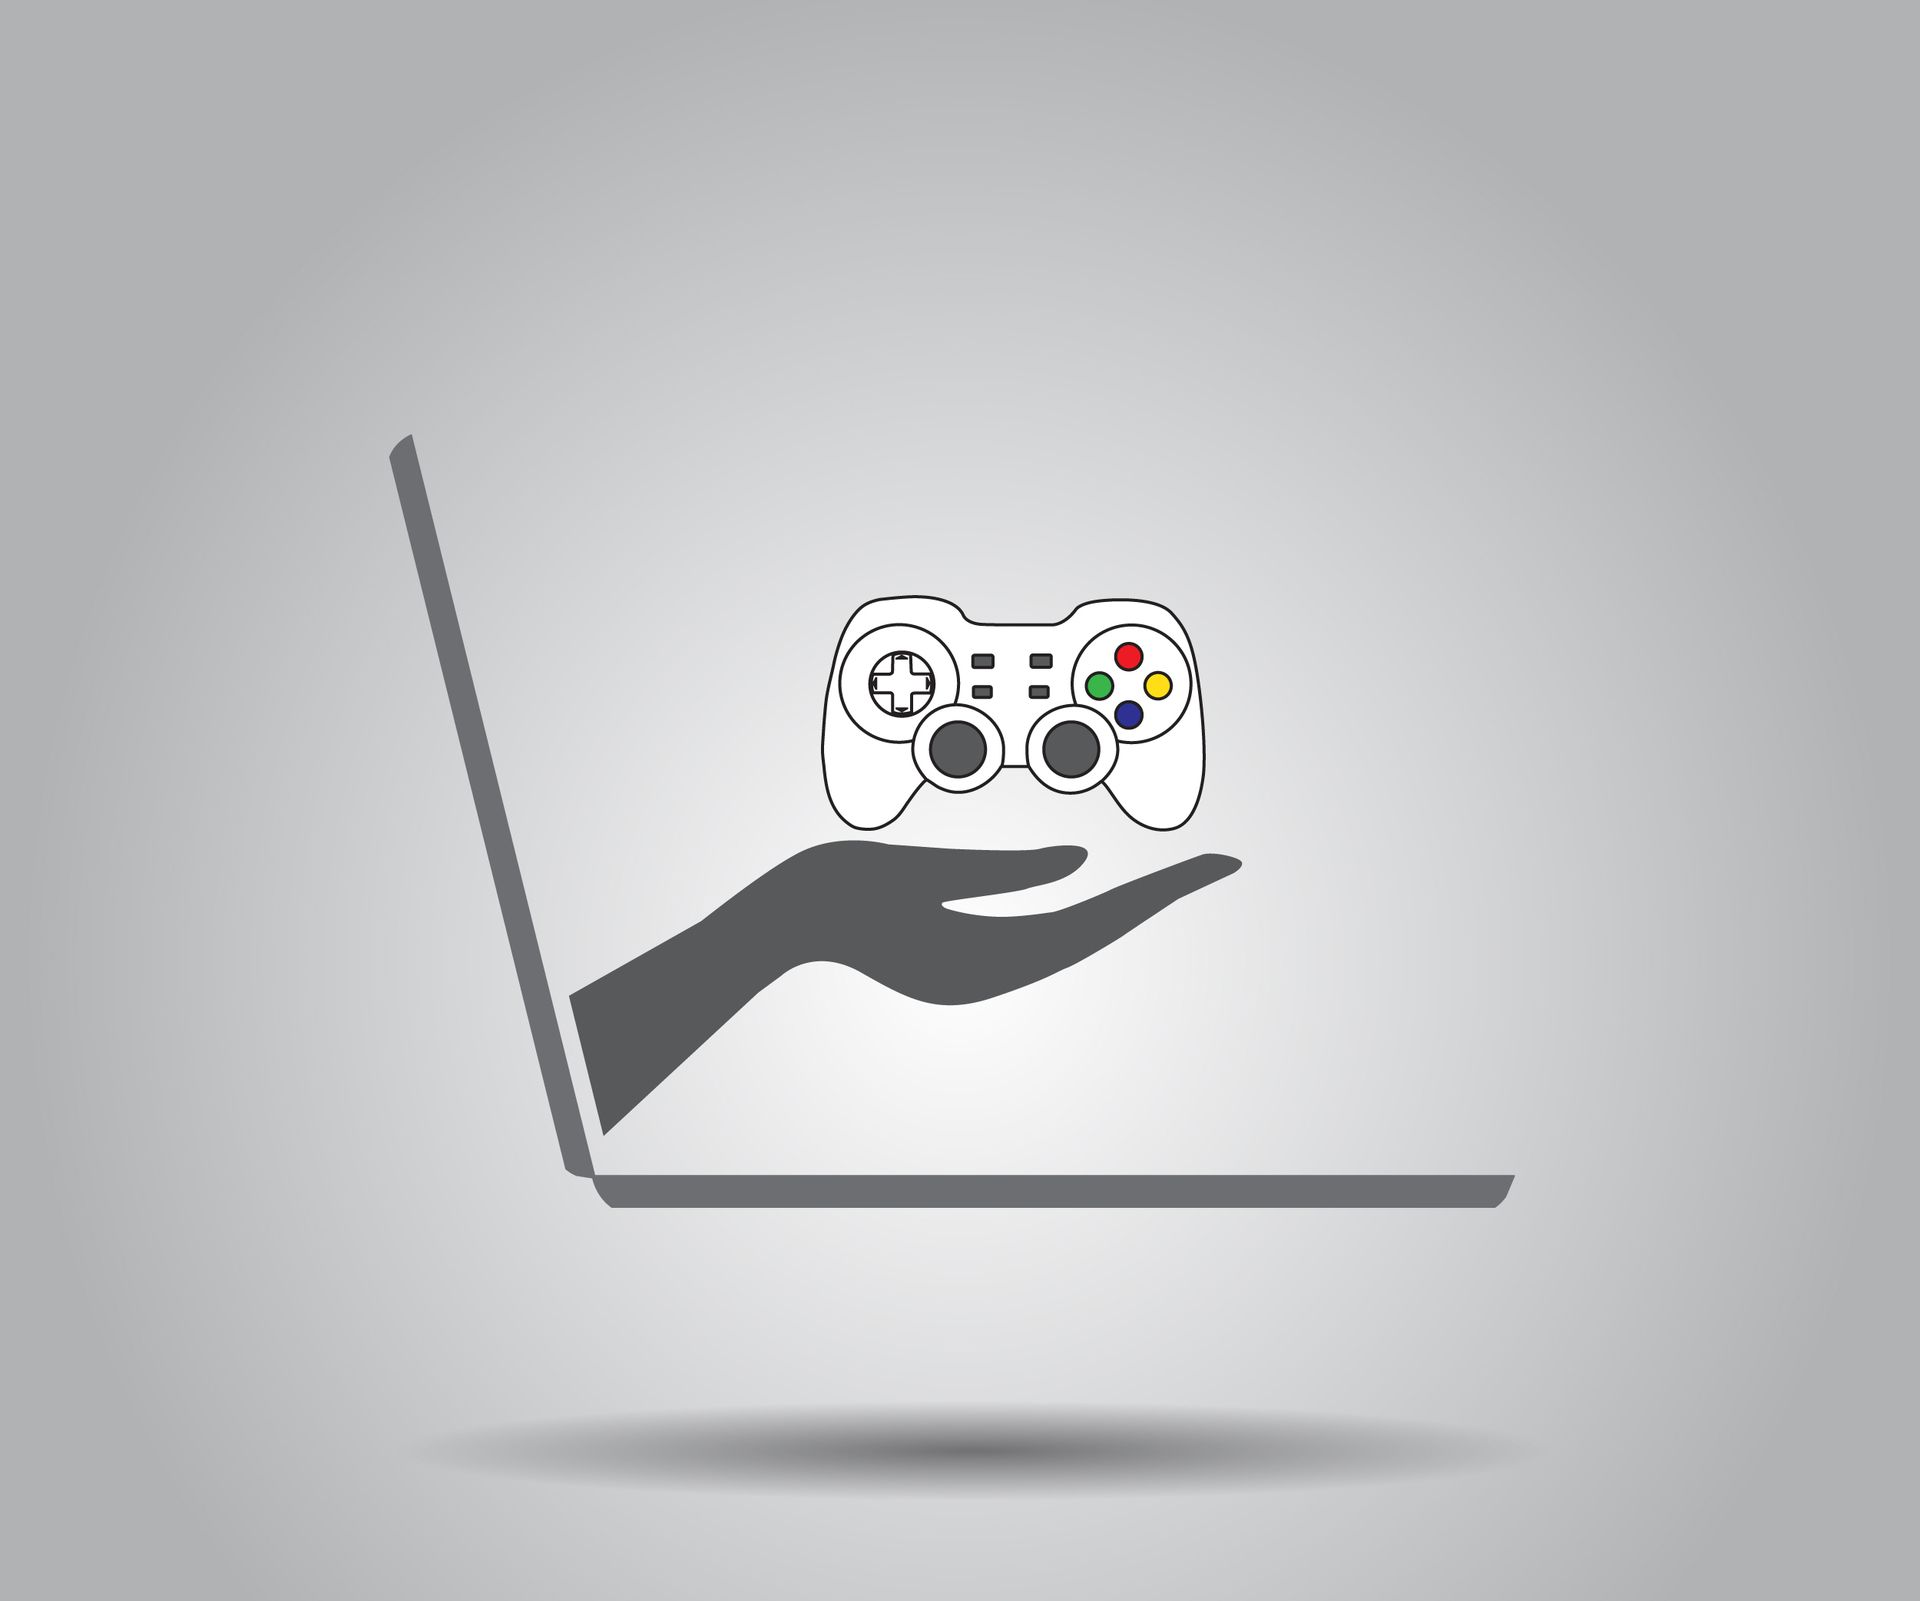 2 Top Tips To Make Compliance Training Fun Through Gamification